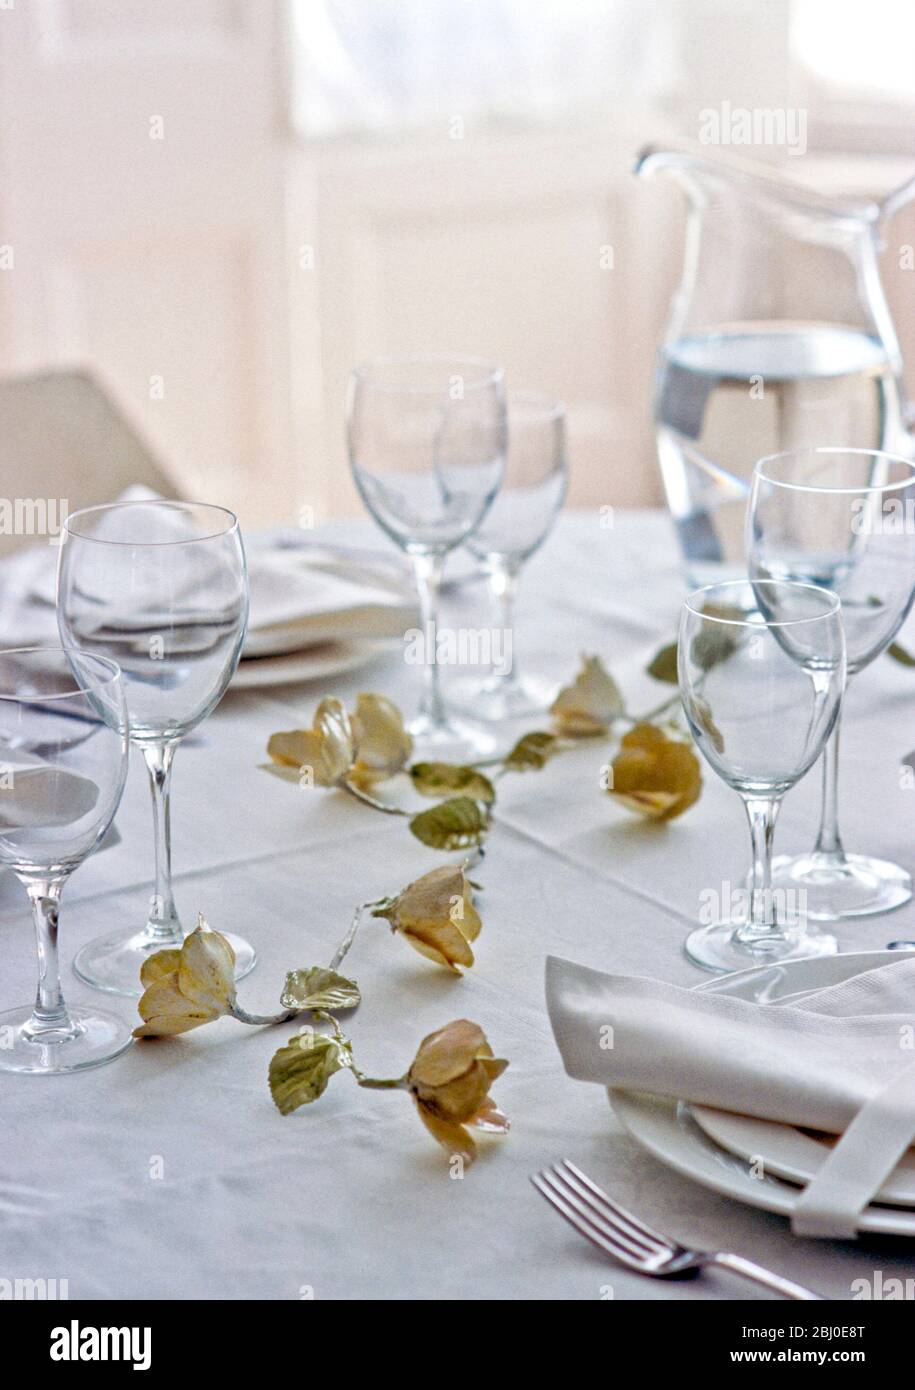 Paper roses on simple white tablecloth with plain crystal glasses and white china for an elegant party table setting - Stock Photo